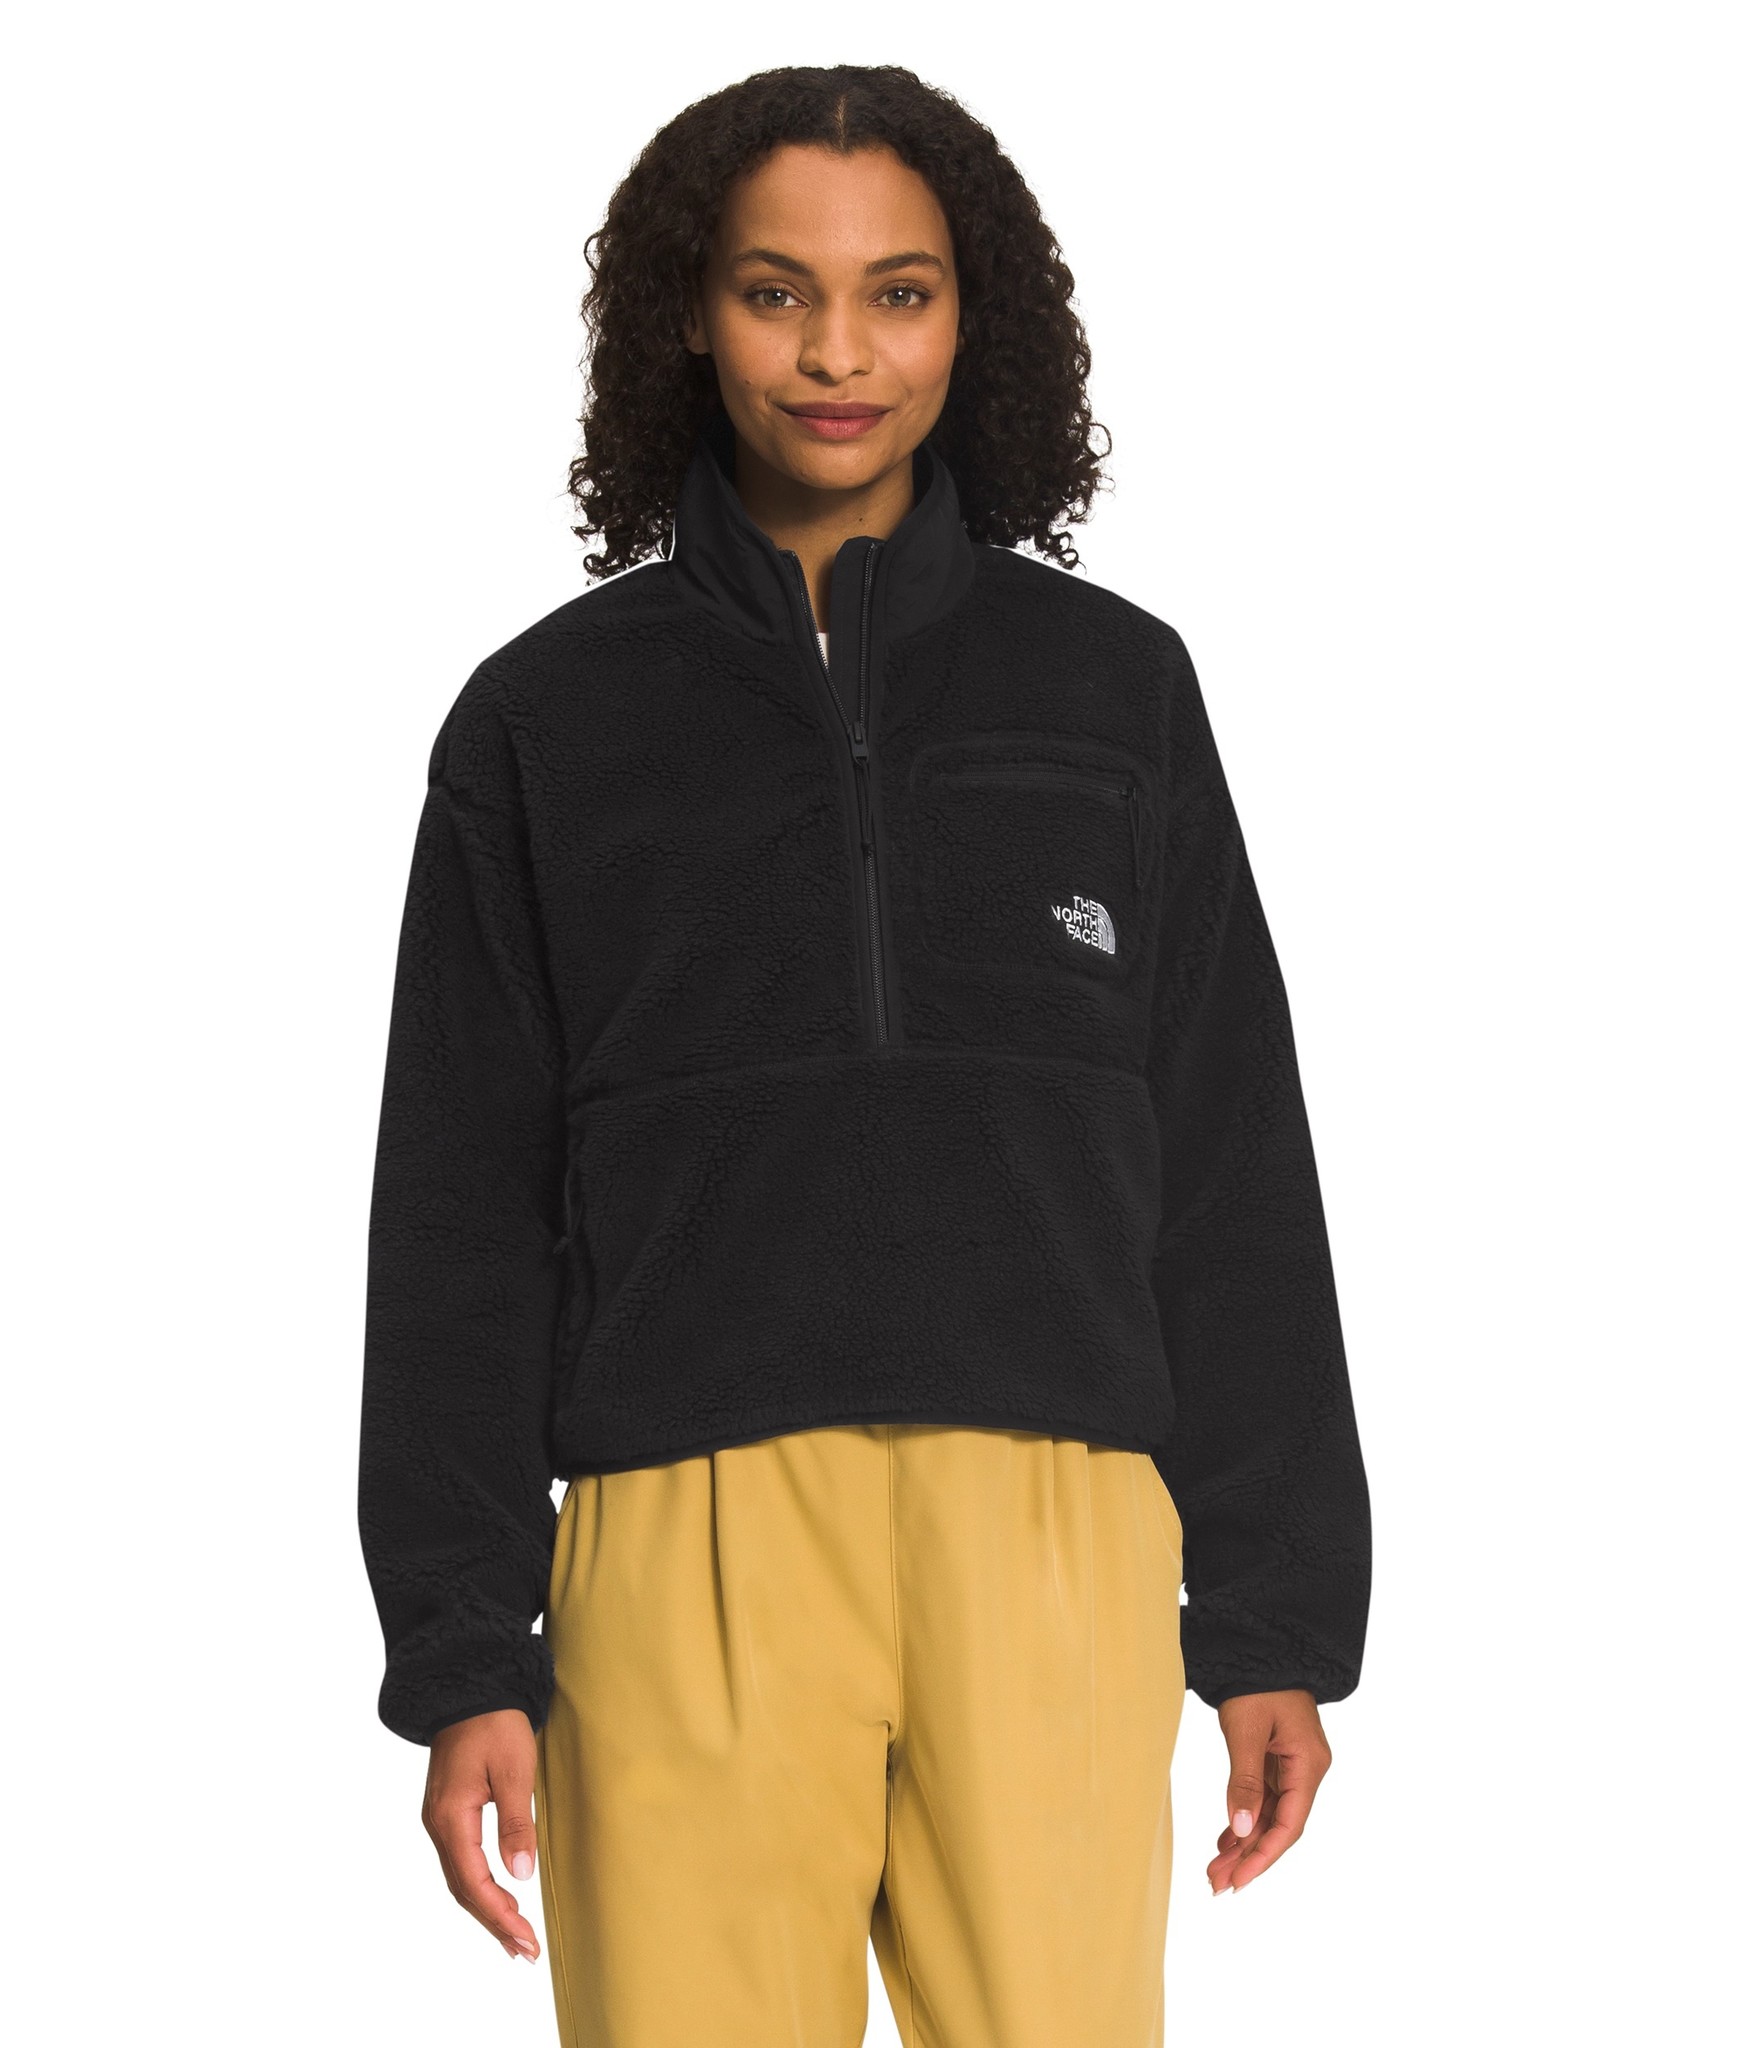 The North Face Men's Extreme Pile Full-Zip Fleece Jacket